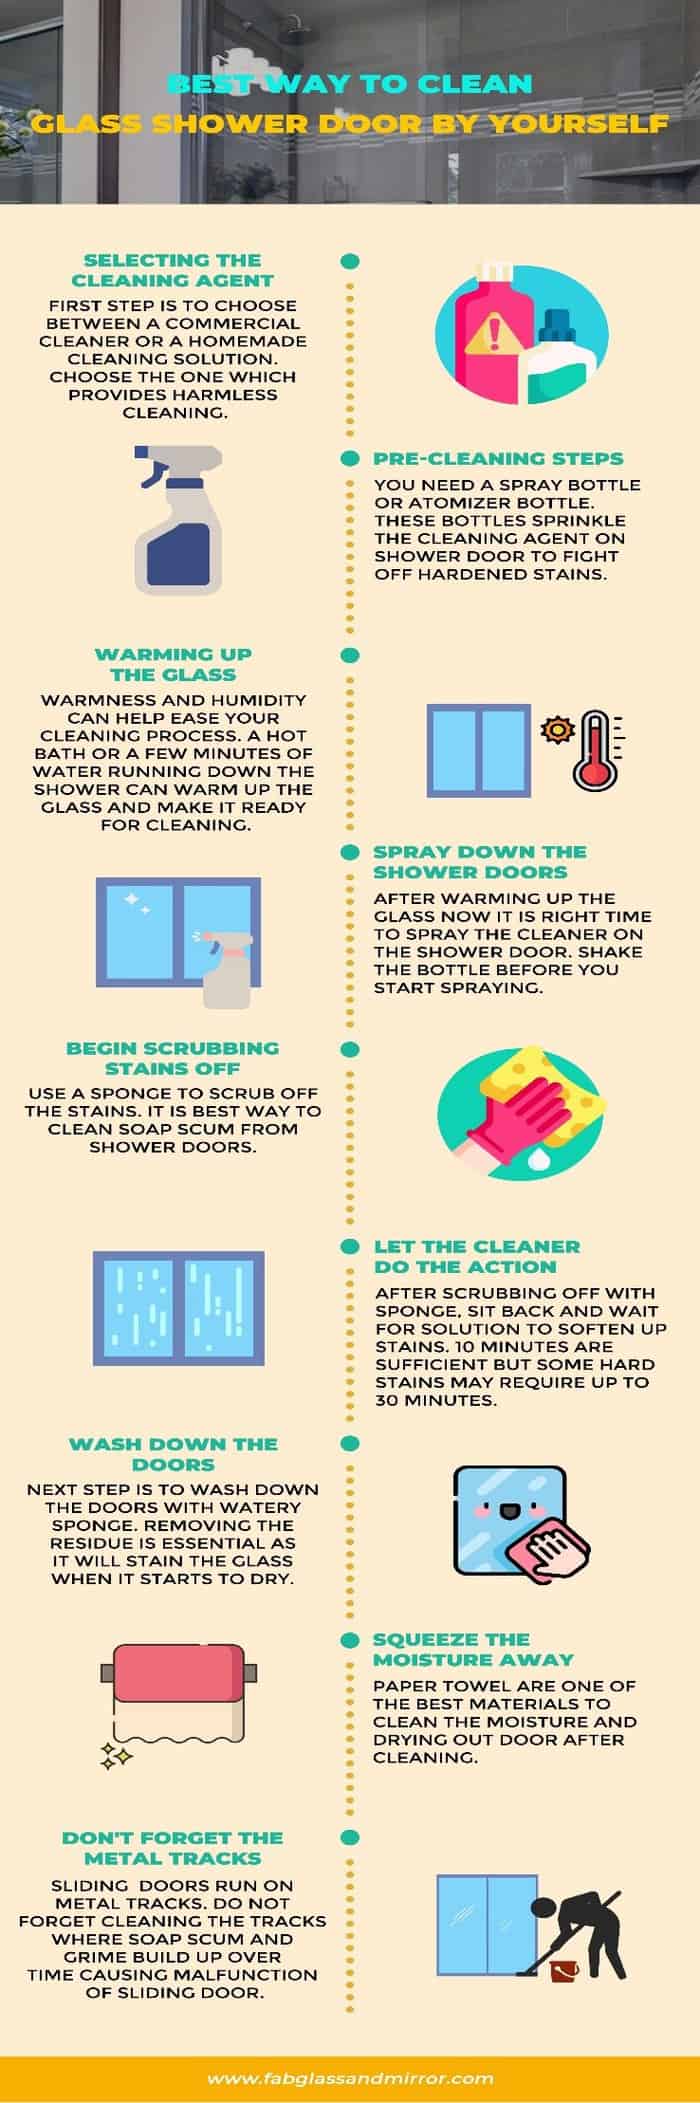 Quick and Safe Hacks to Clean Glass Shower Doors